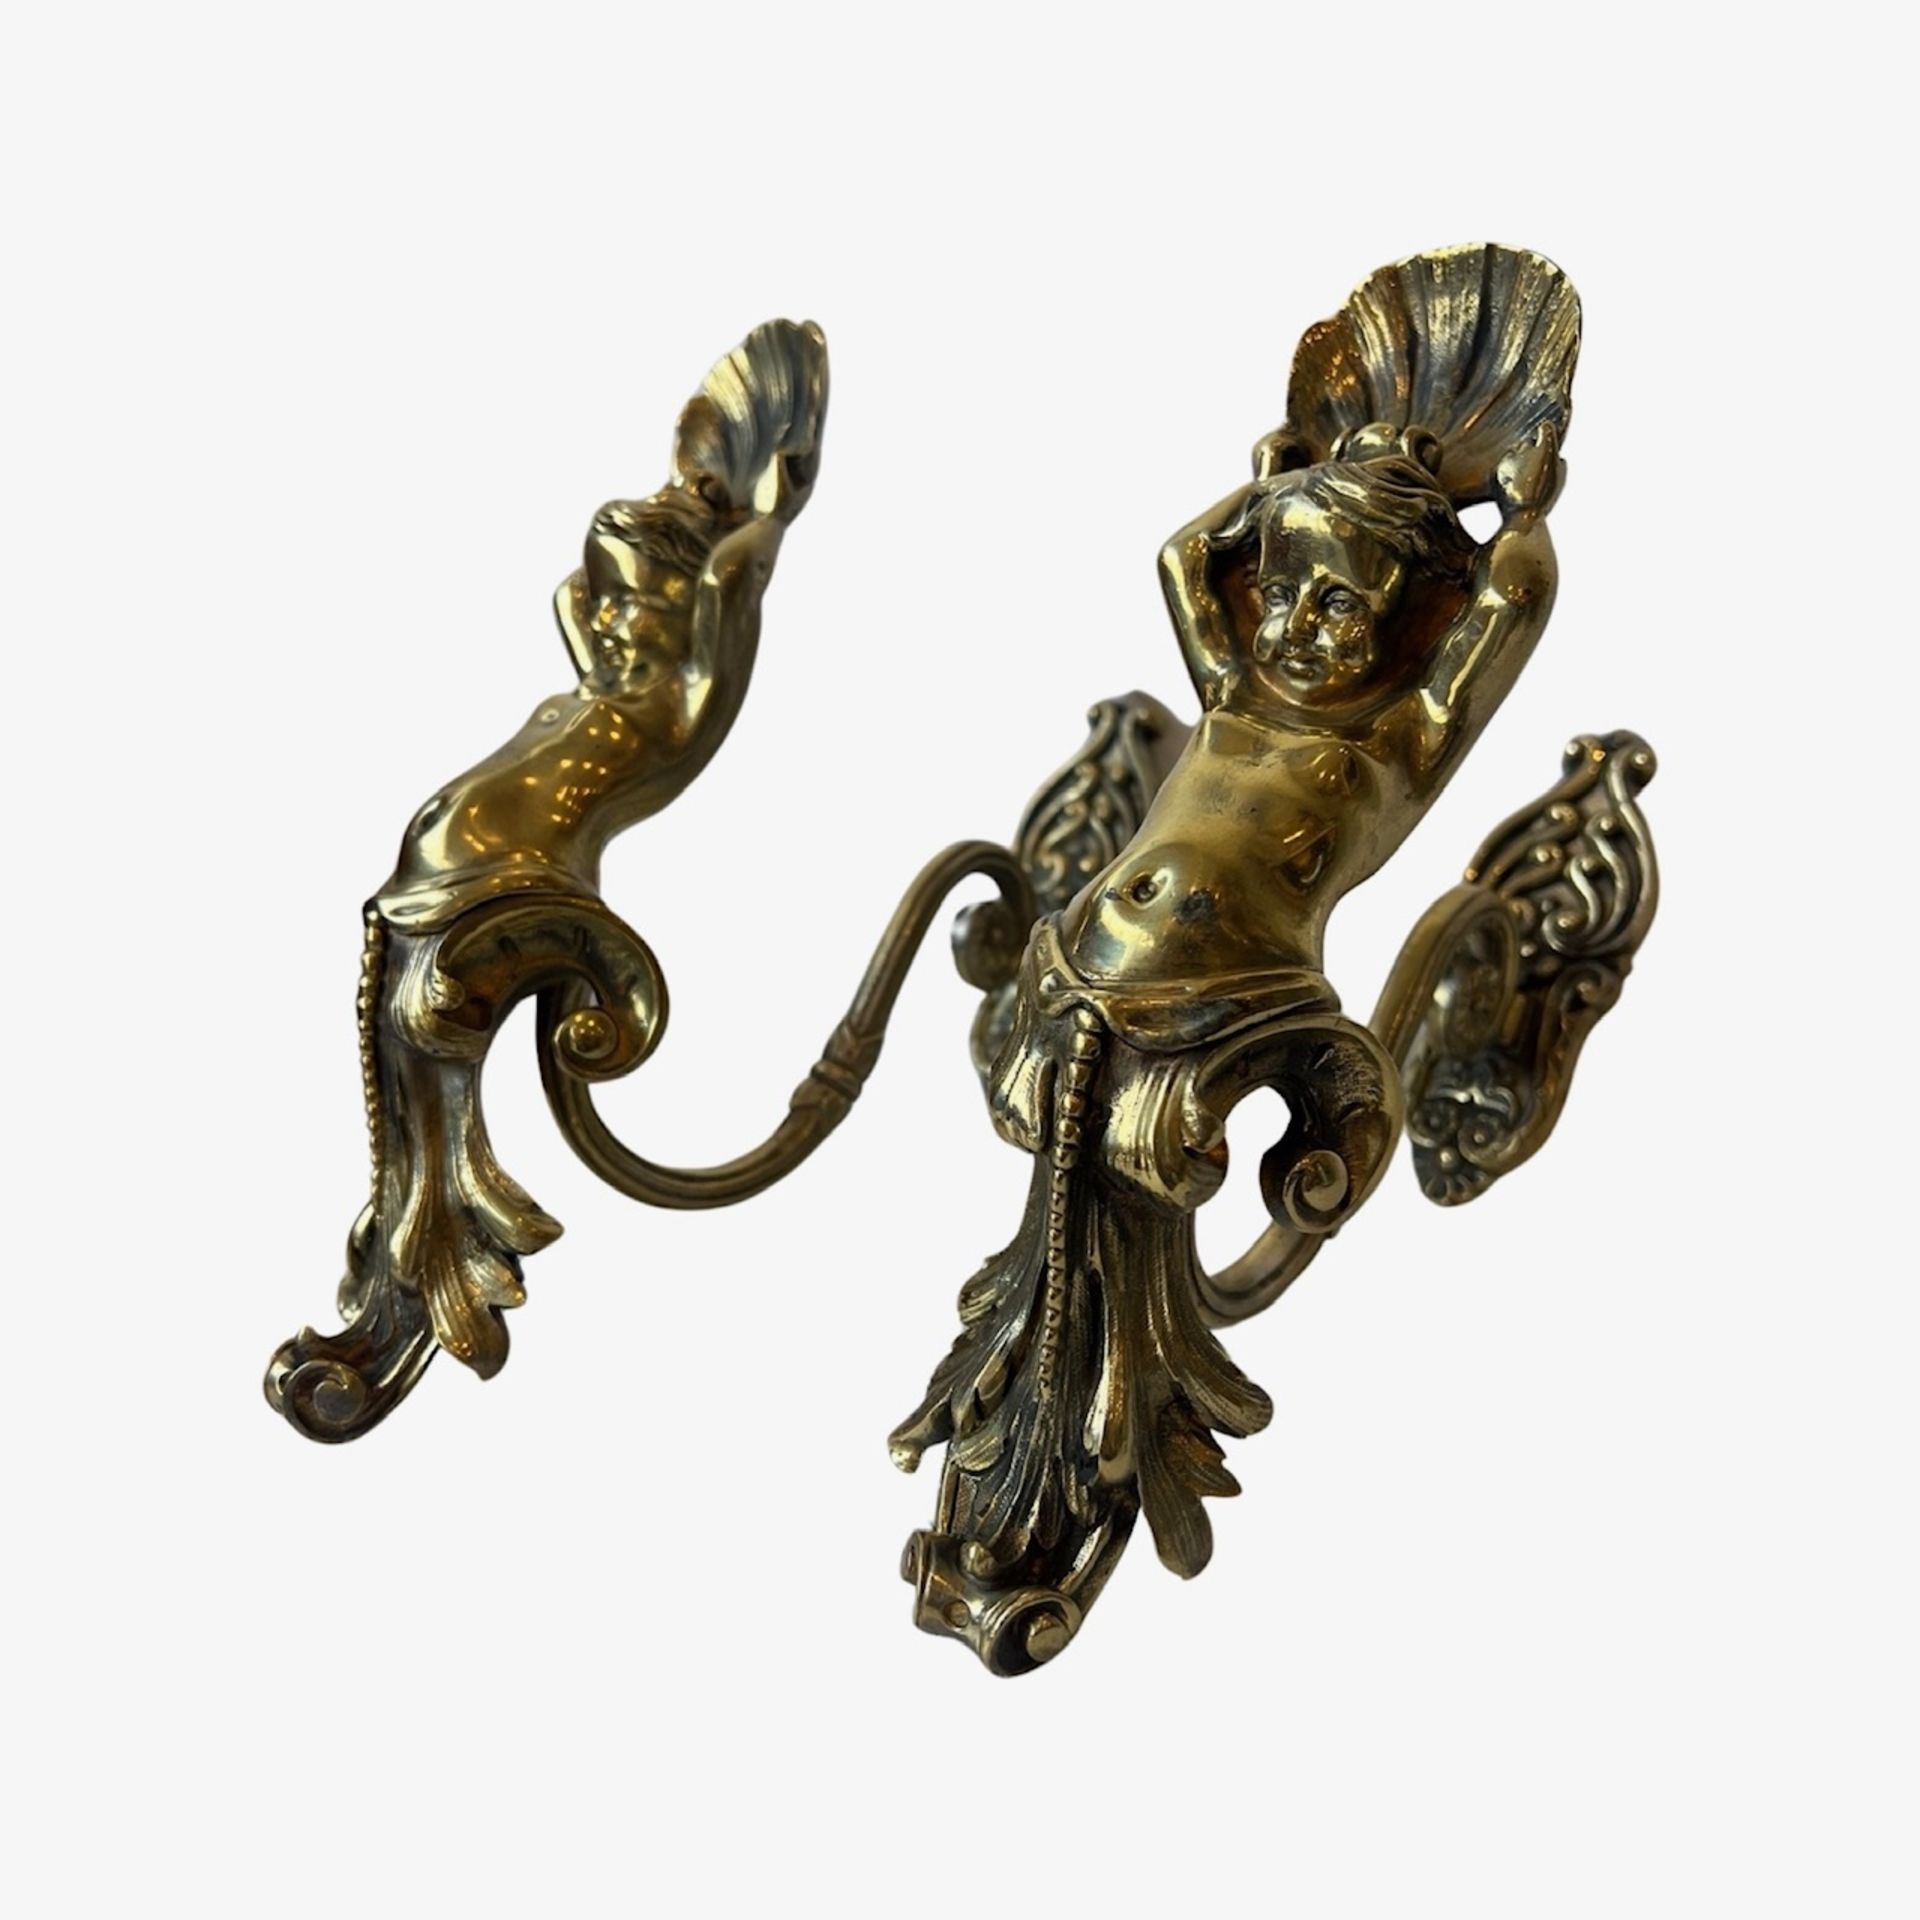 A PAIR OF LATE 19TH CENTURY FRENCH BRONZE CURTAIN TIE BACKS - Image 2 of 7